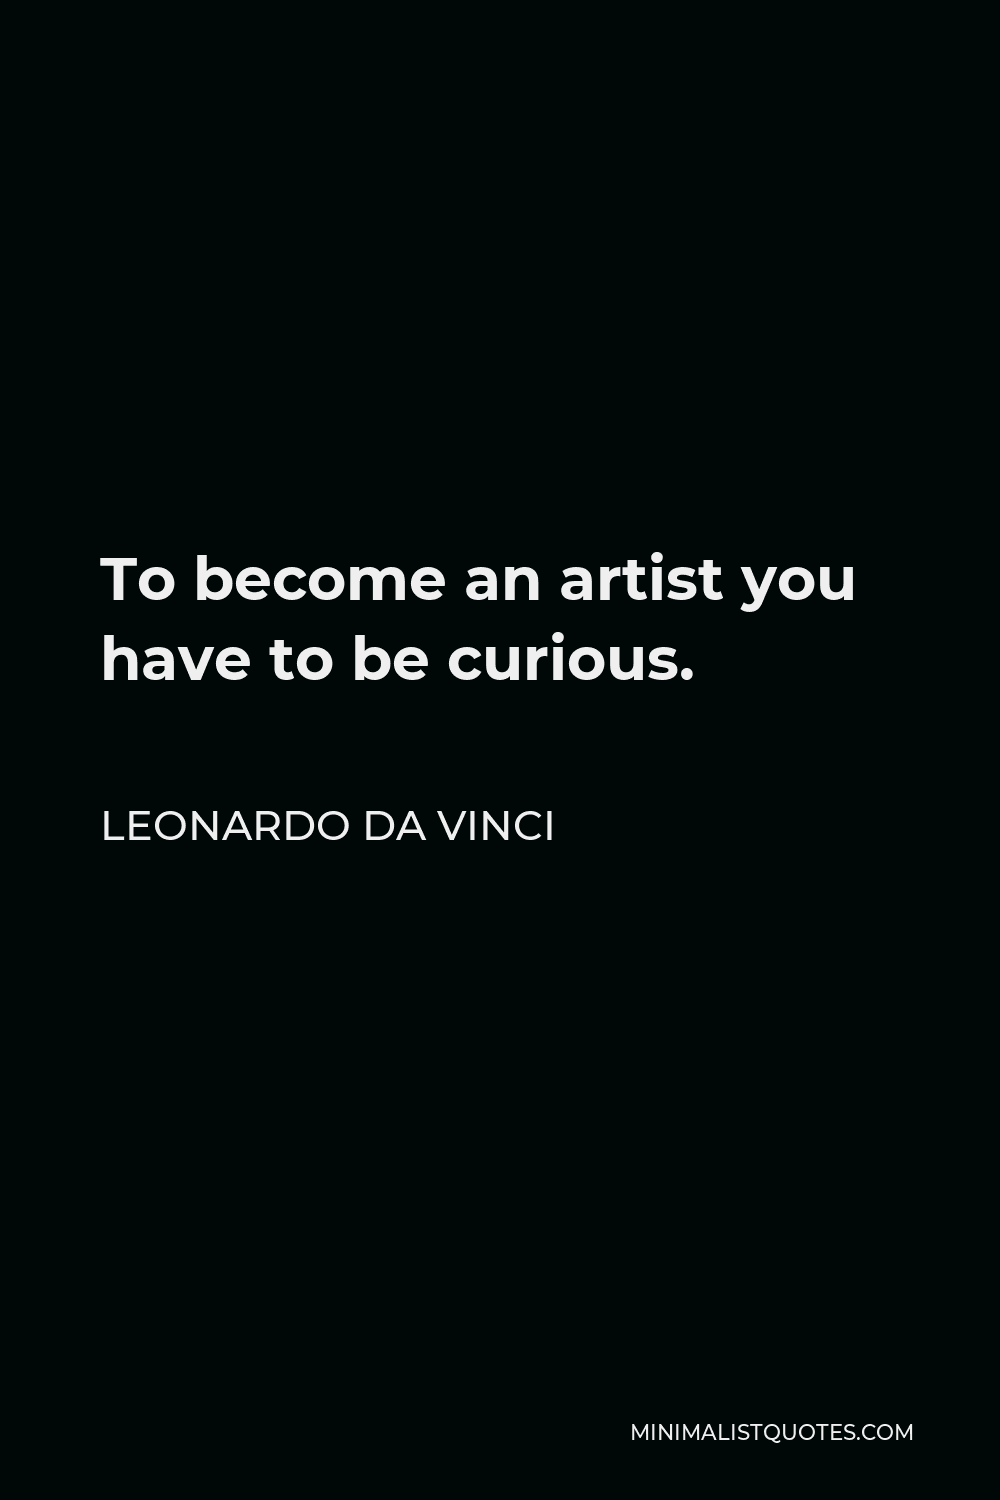 Leonardo da Vinci Quote - To become an artist you have to be curious.